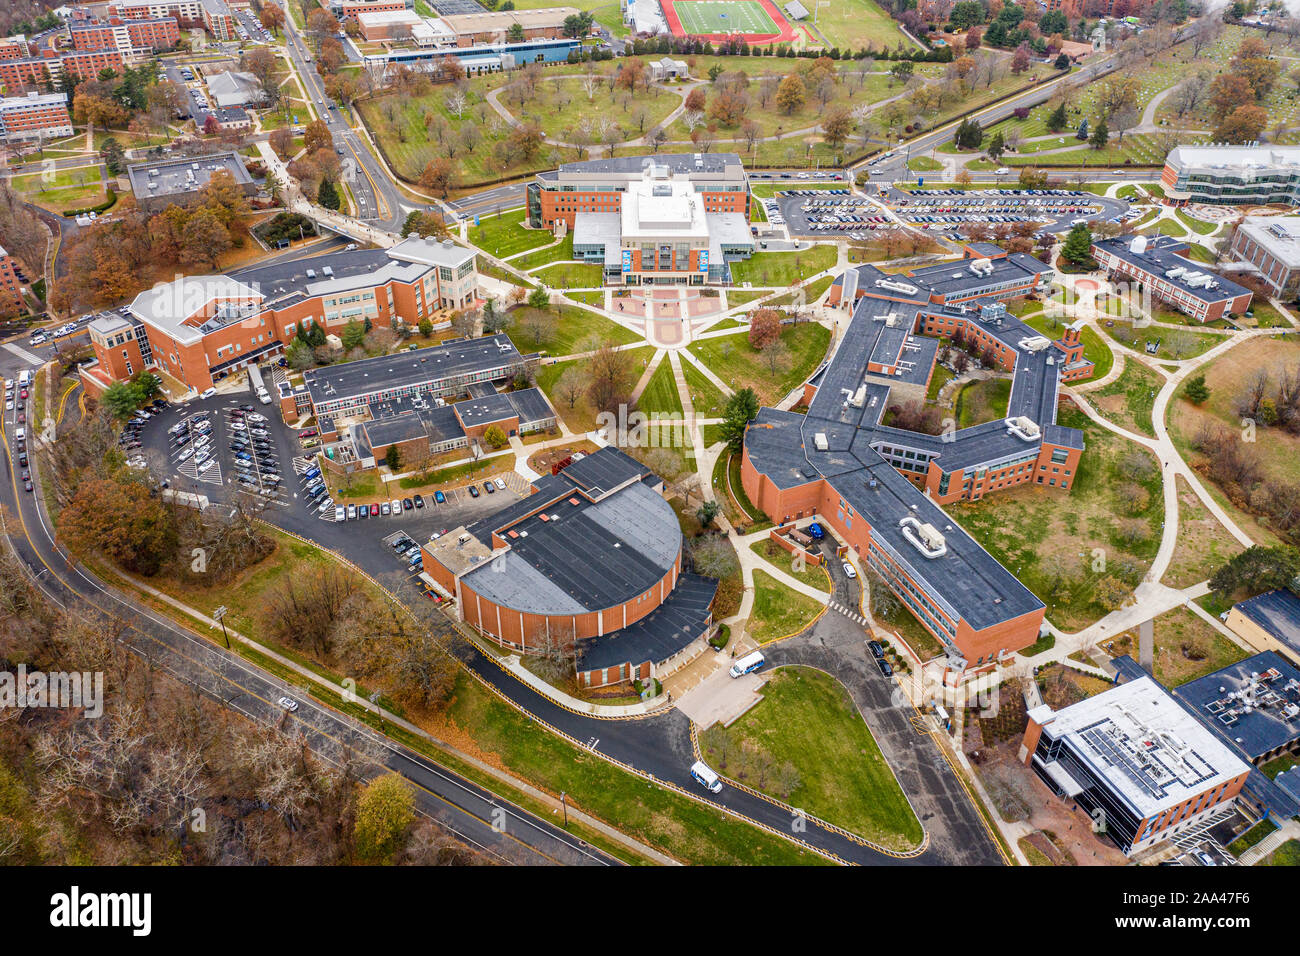 Southern Connecticut State University, New Haven, CT, USA Stockfoto